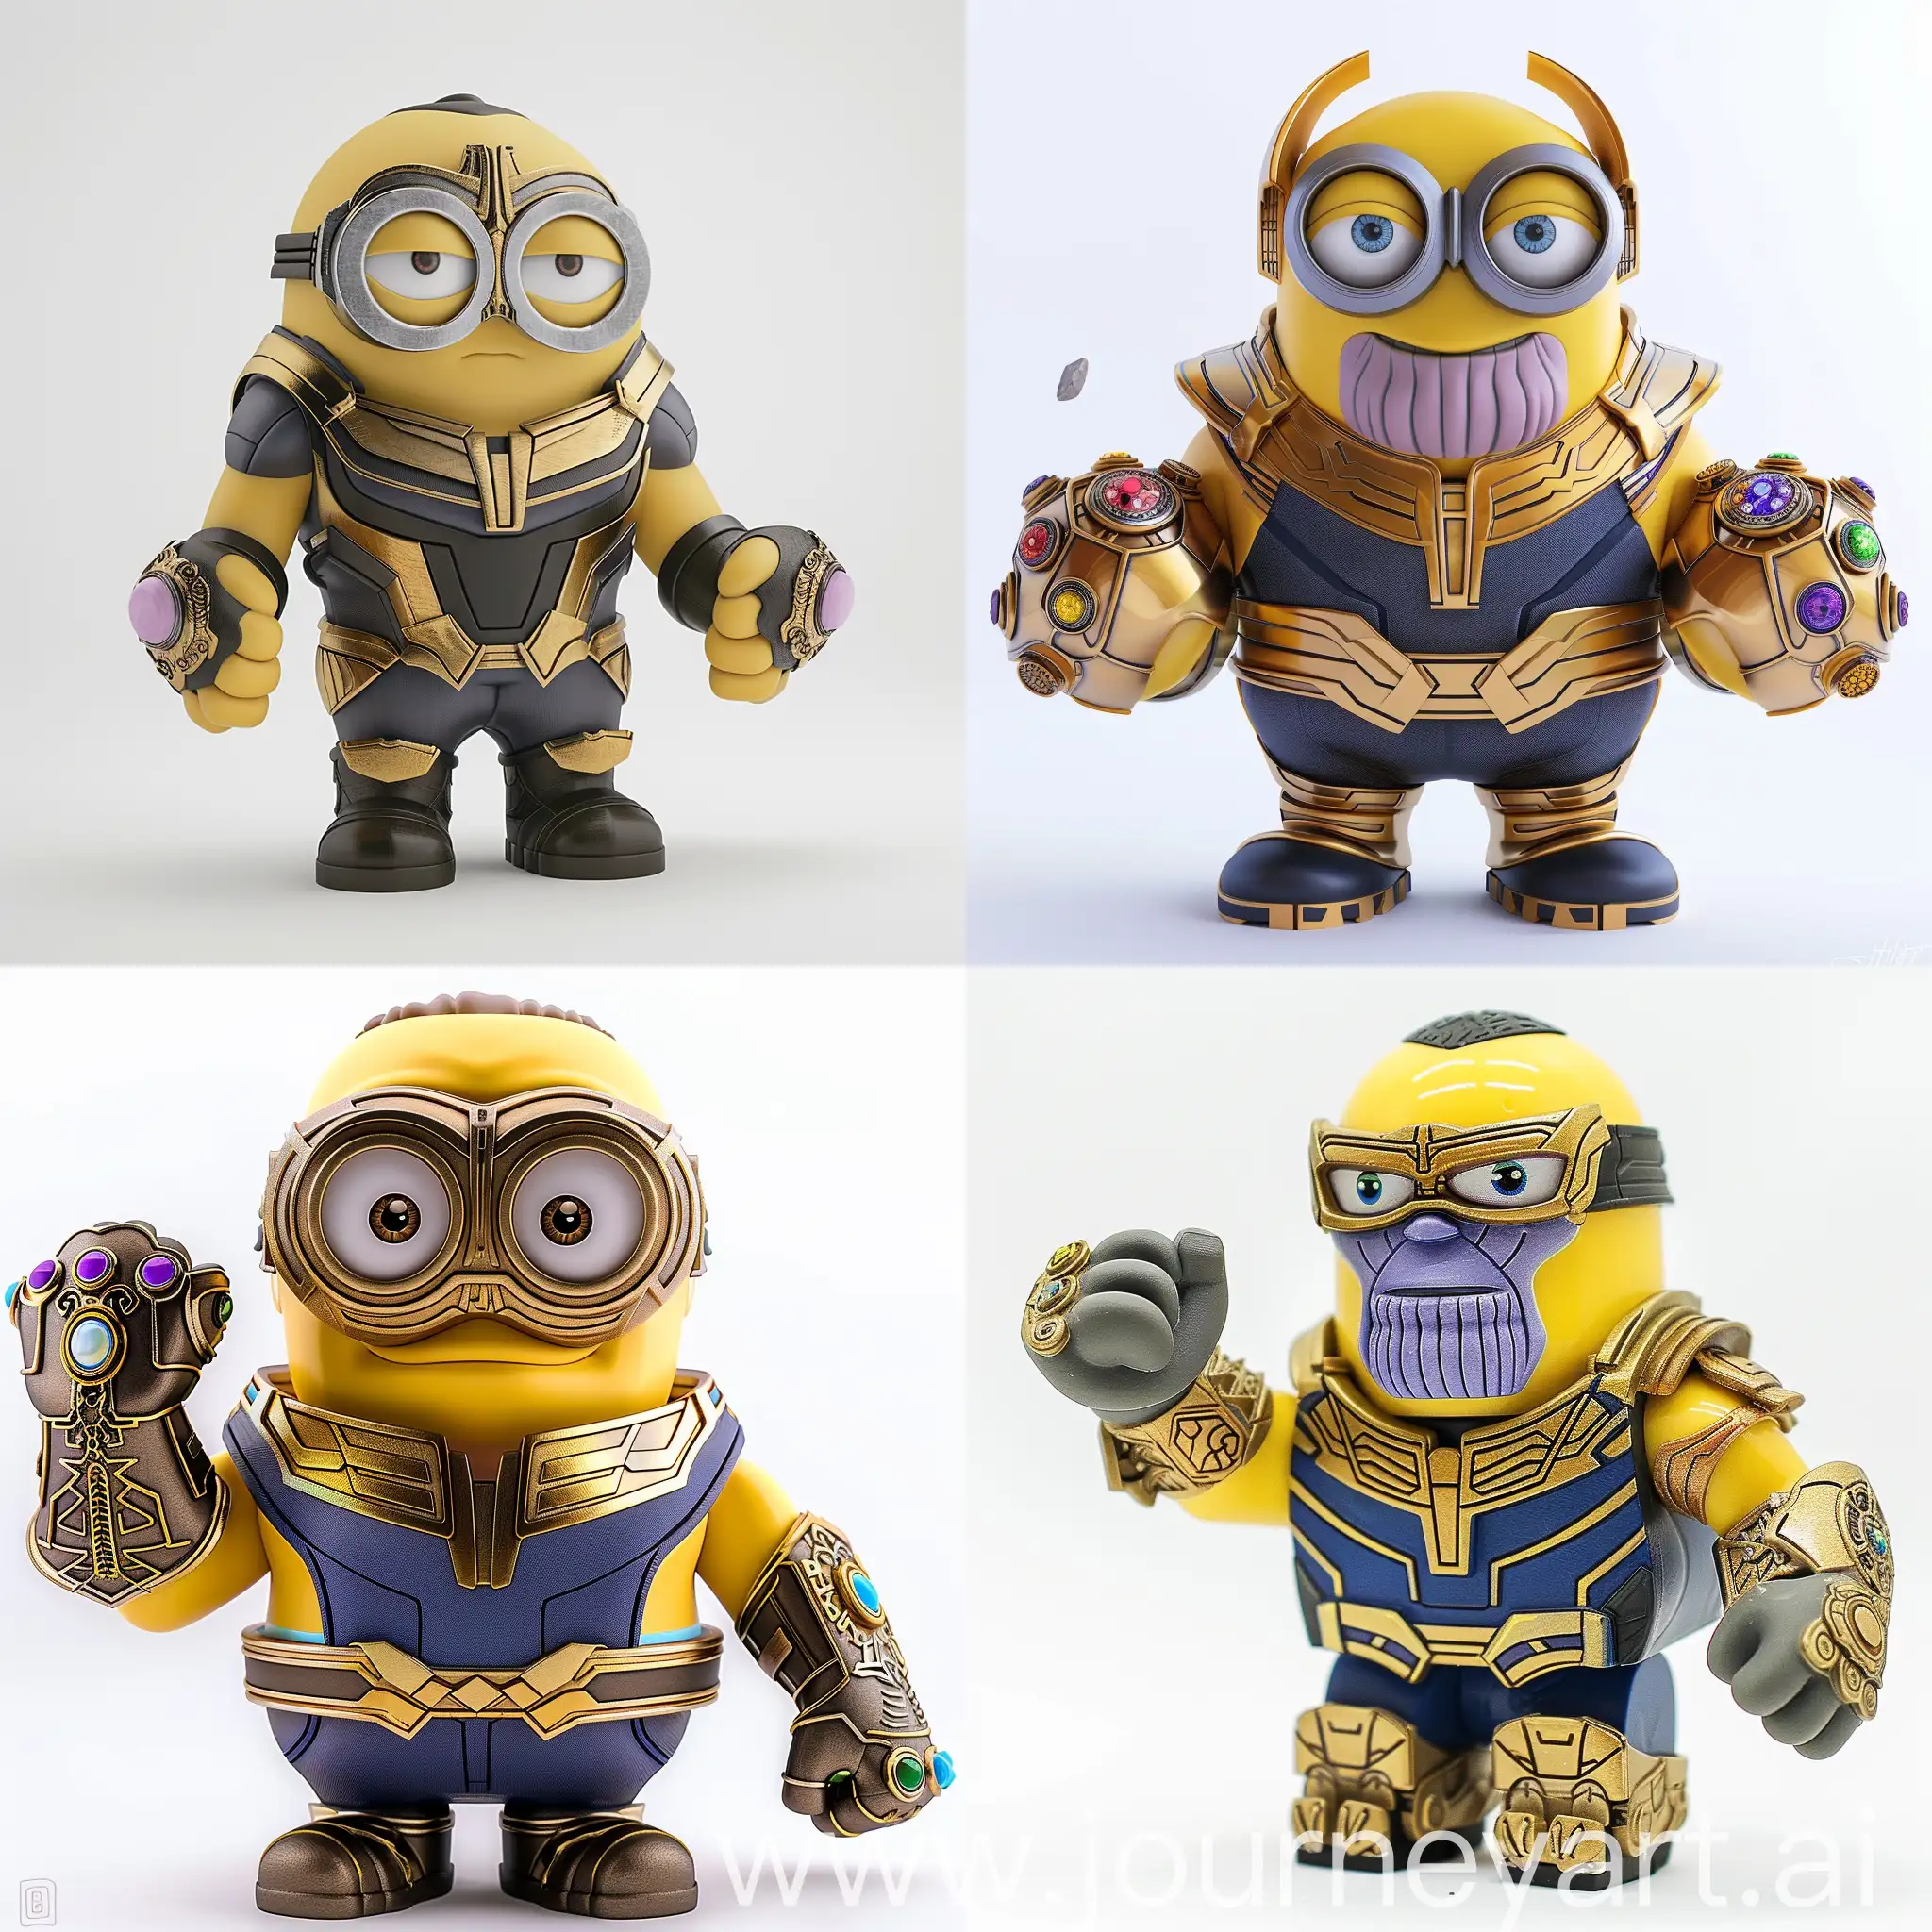 Minion-Cosplaying-as-Thanos-in-HighQuality-Detailed-Portrait